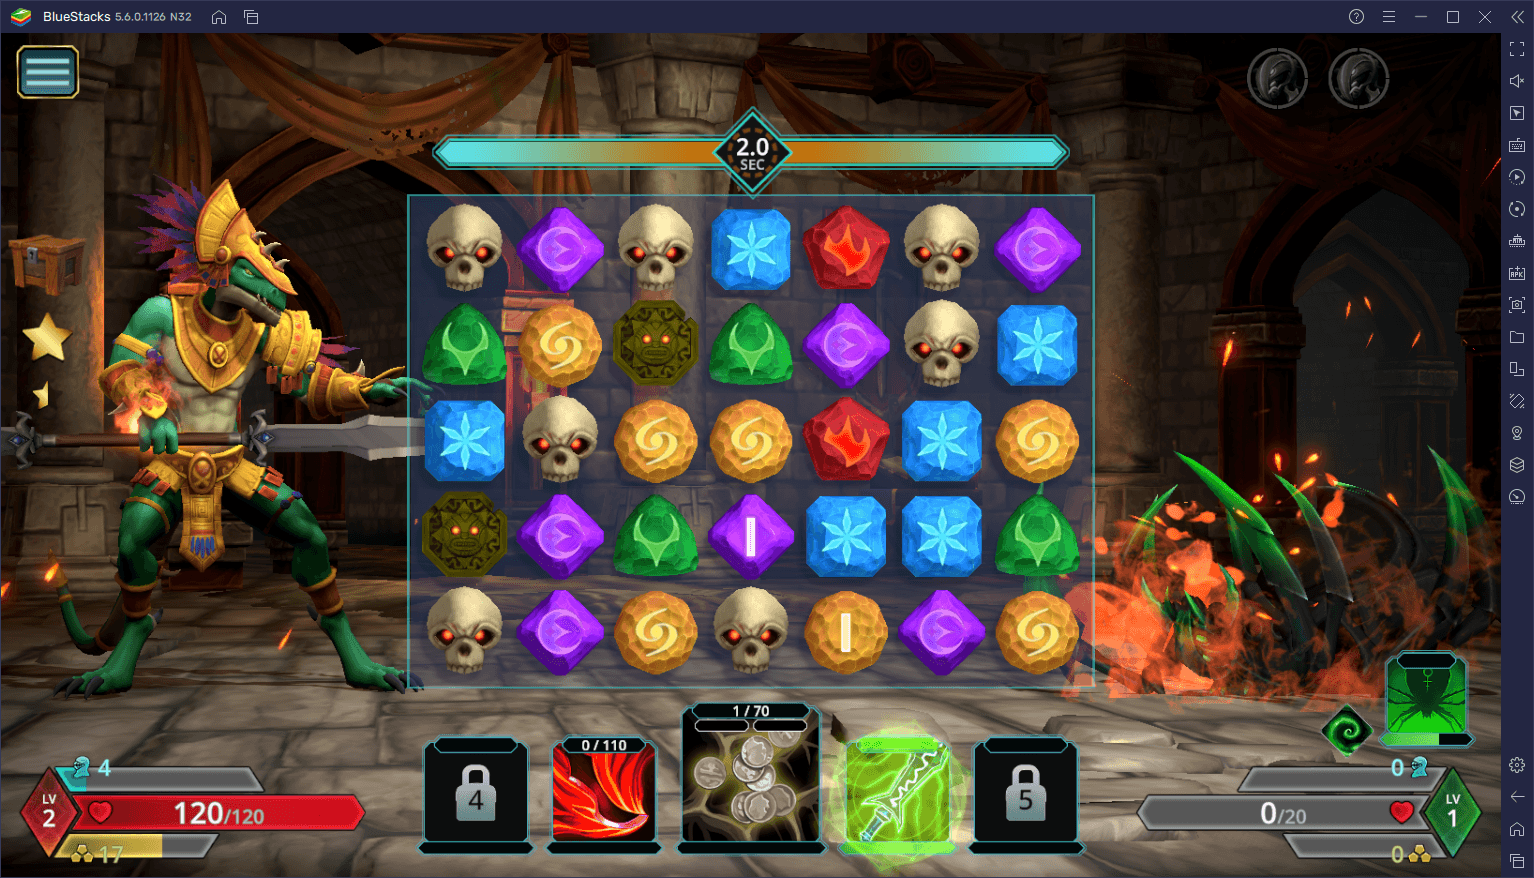 Puzzle Quest 3 Beginner’s Guide with the Best Tips and Tricks for Newcomers